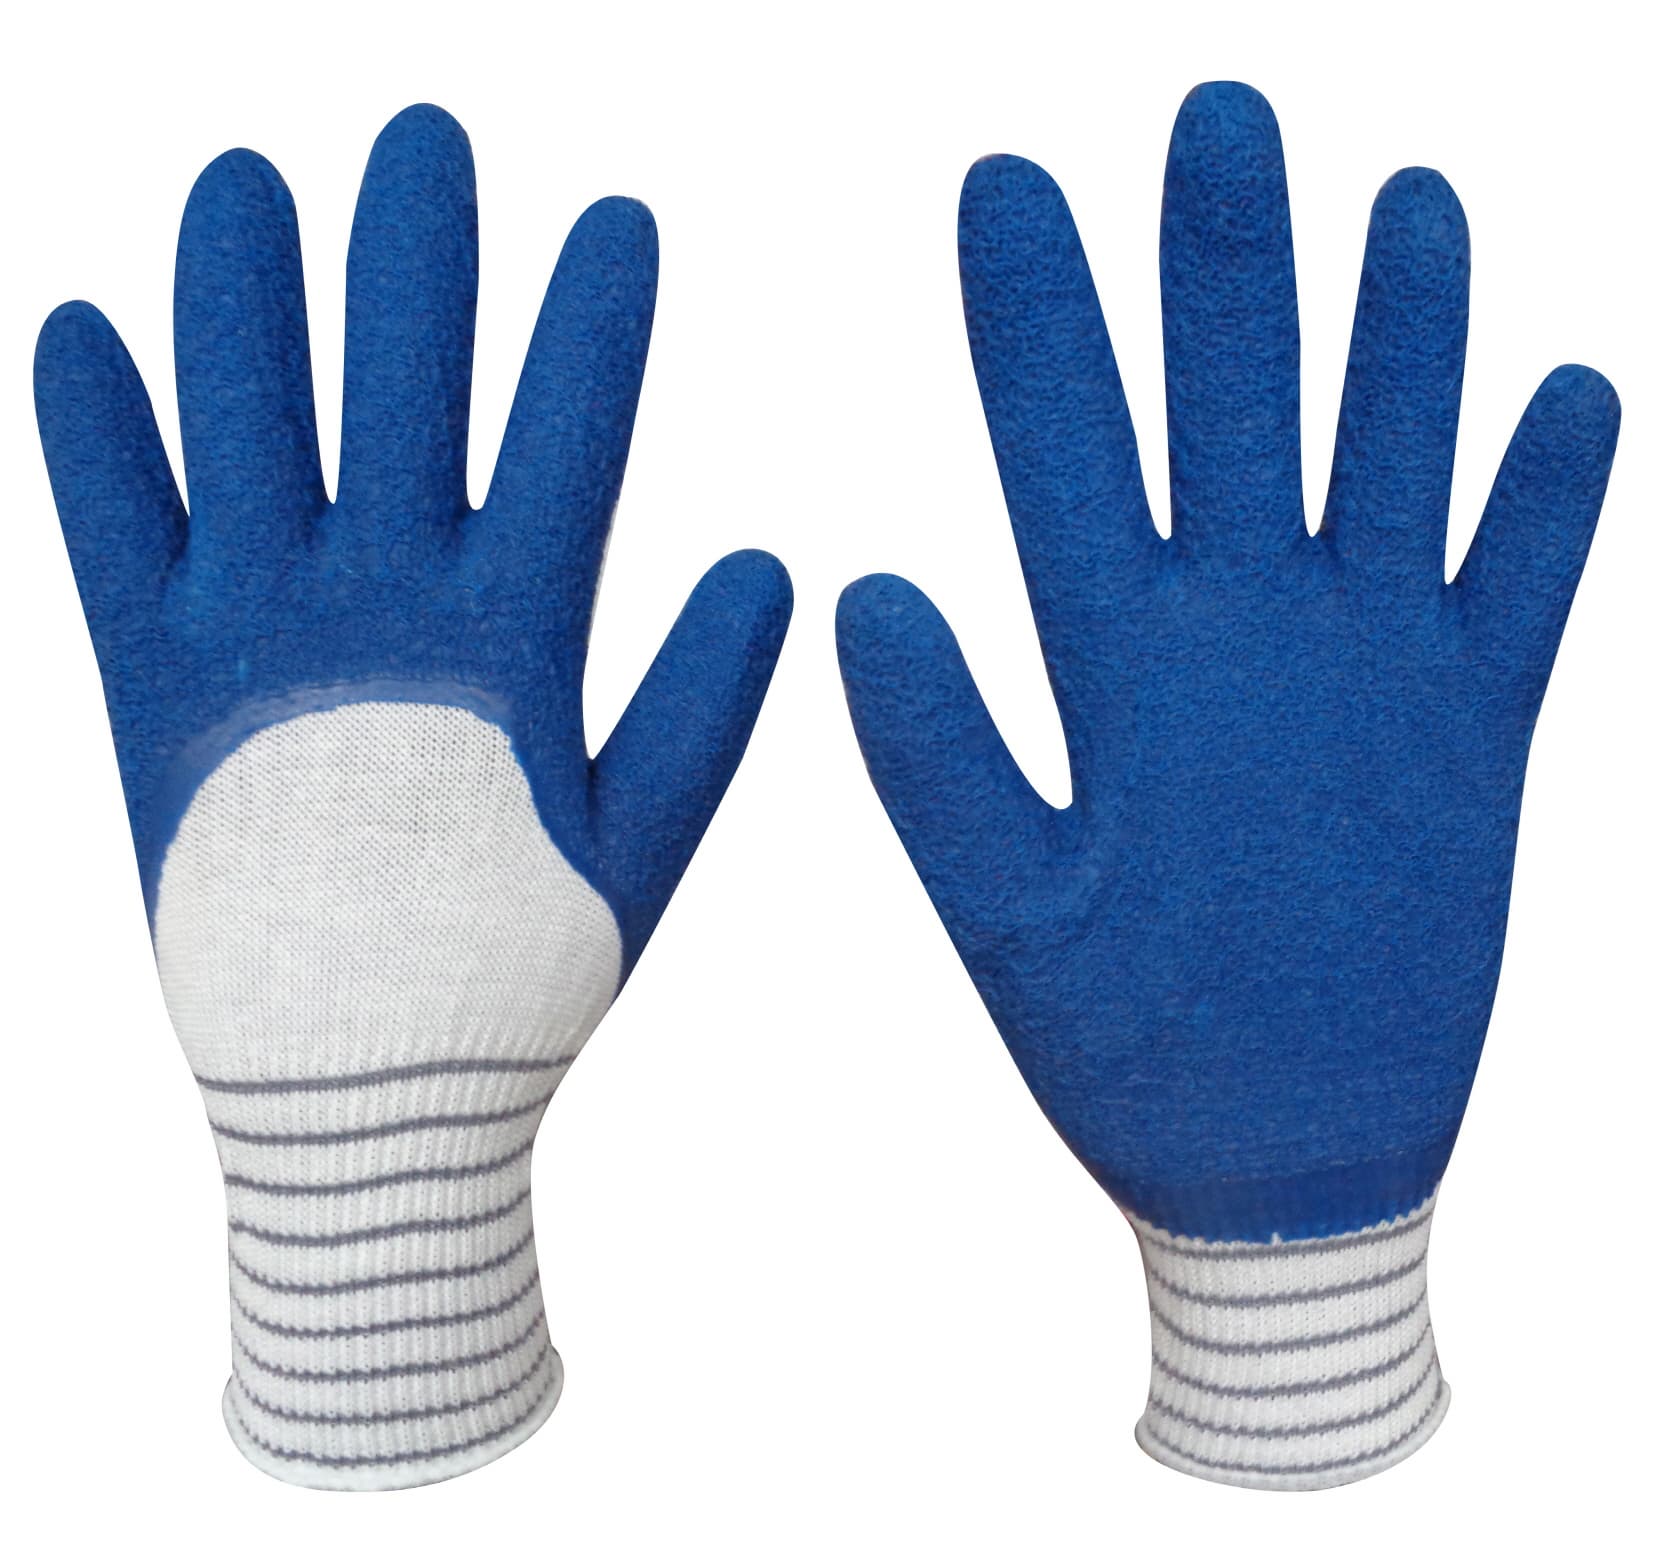 BDHLCG_13G Bamboo_PSF with Latex Crinkle coating gloves